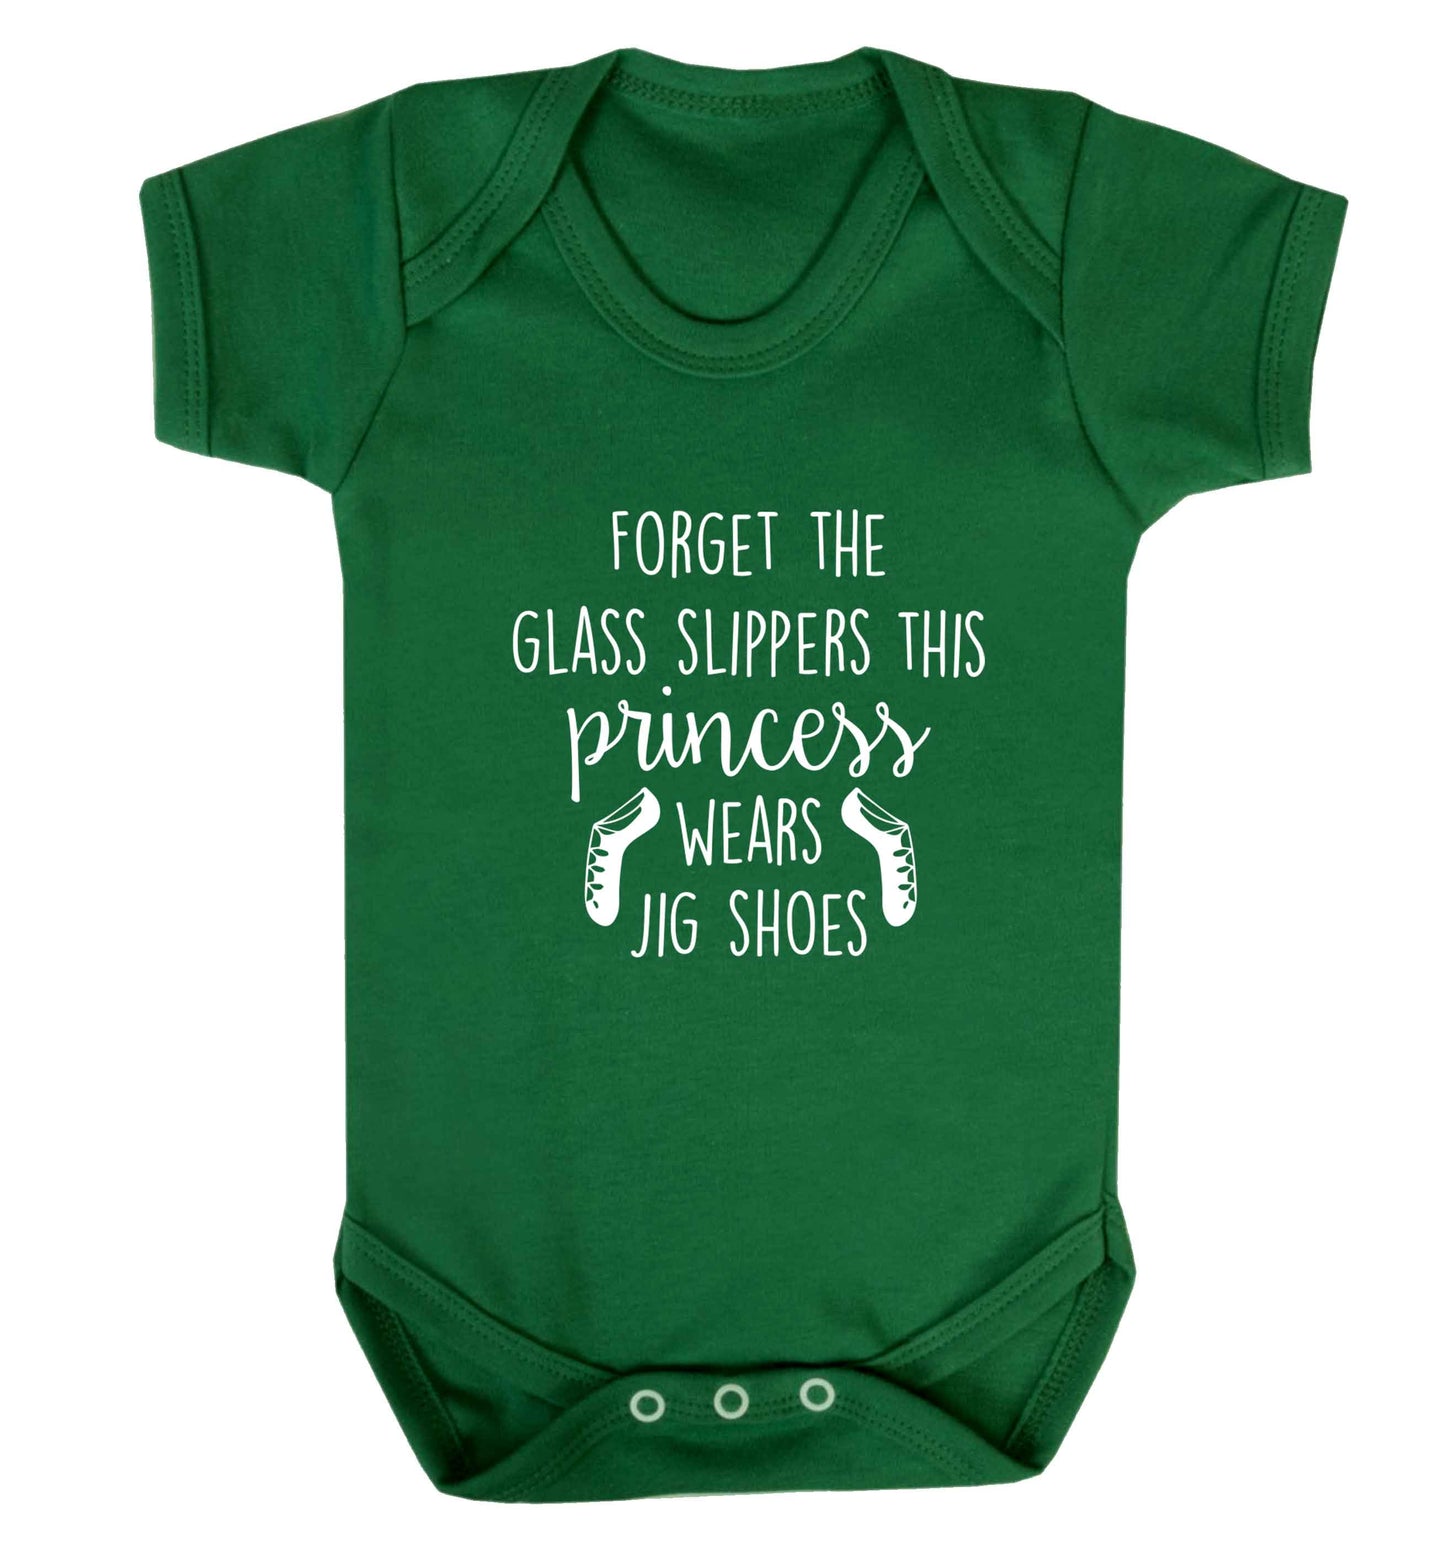 This princess wears jig shoes baby vest green 18-24 months